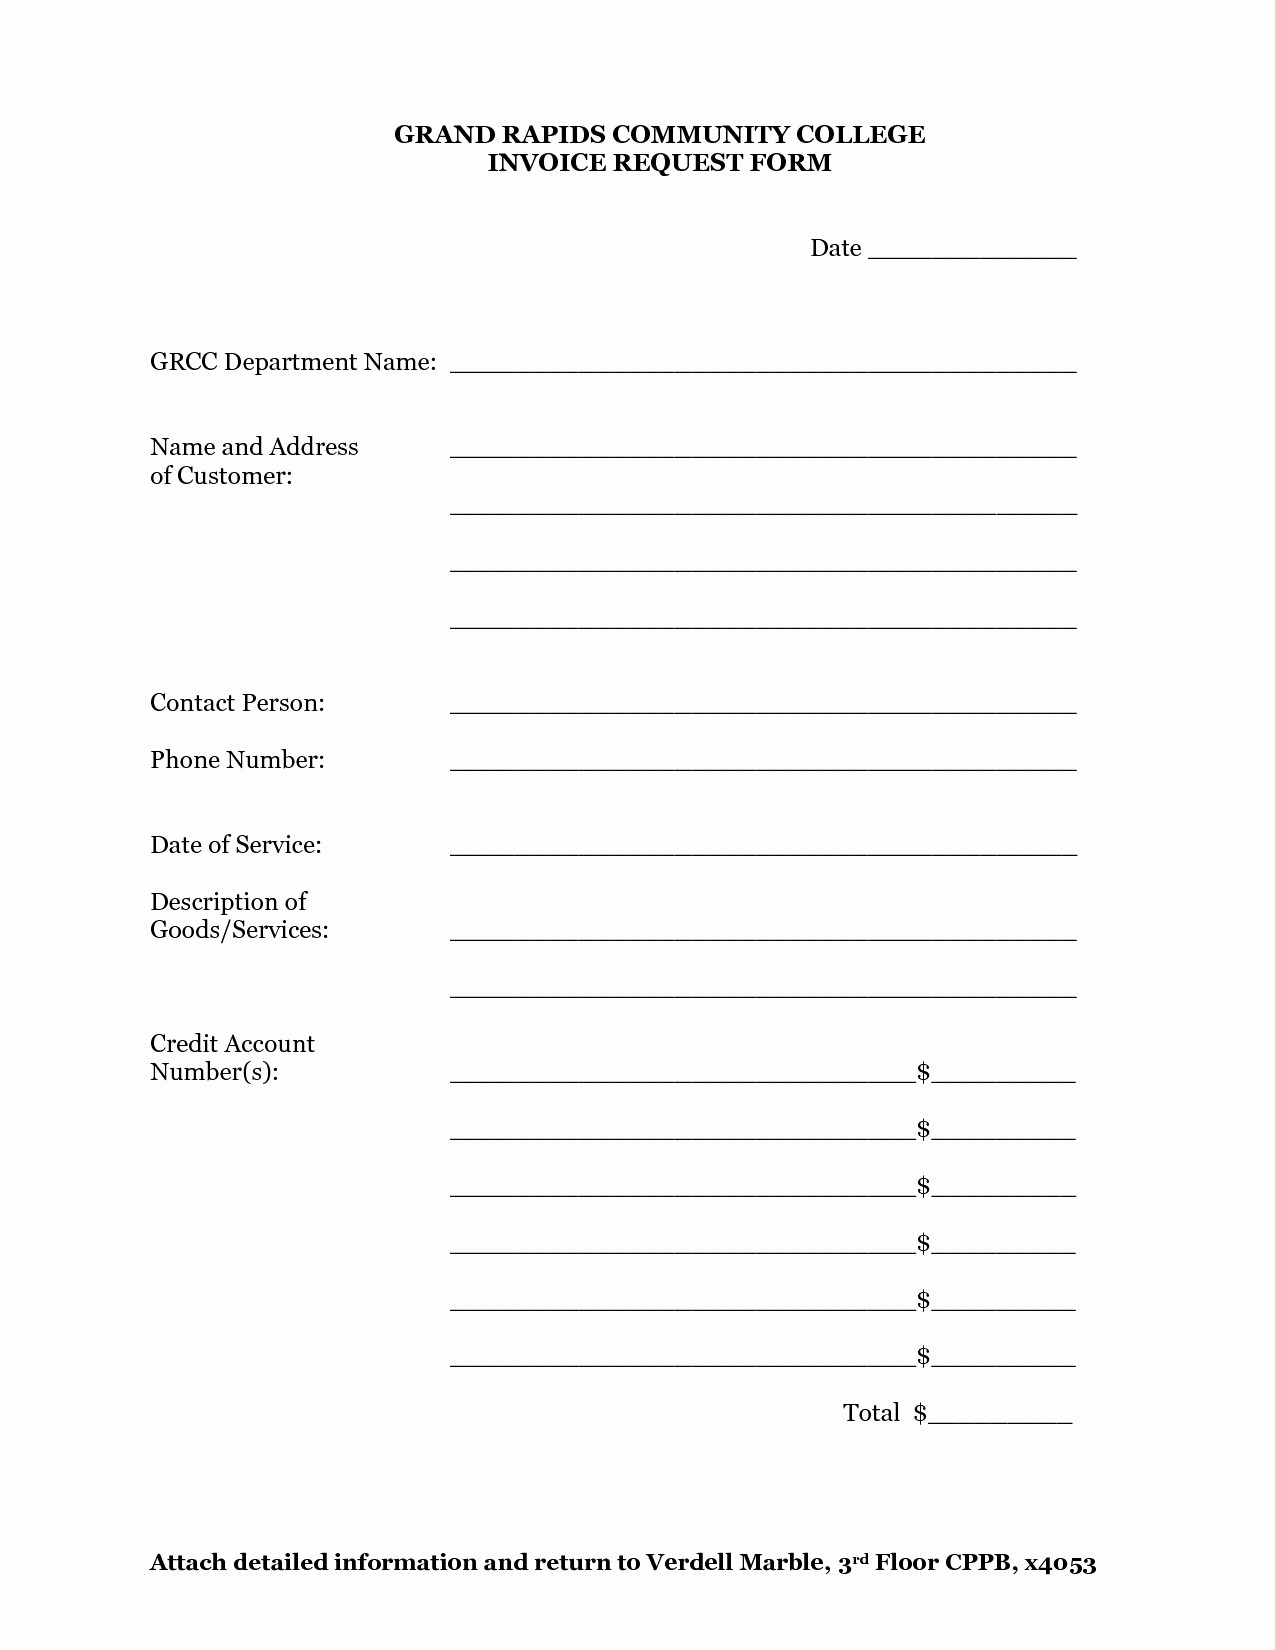 Copy Of An Invoice Template Beautiful Invoice form Template or Copy Invoice Template Invoice